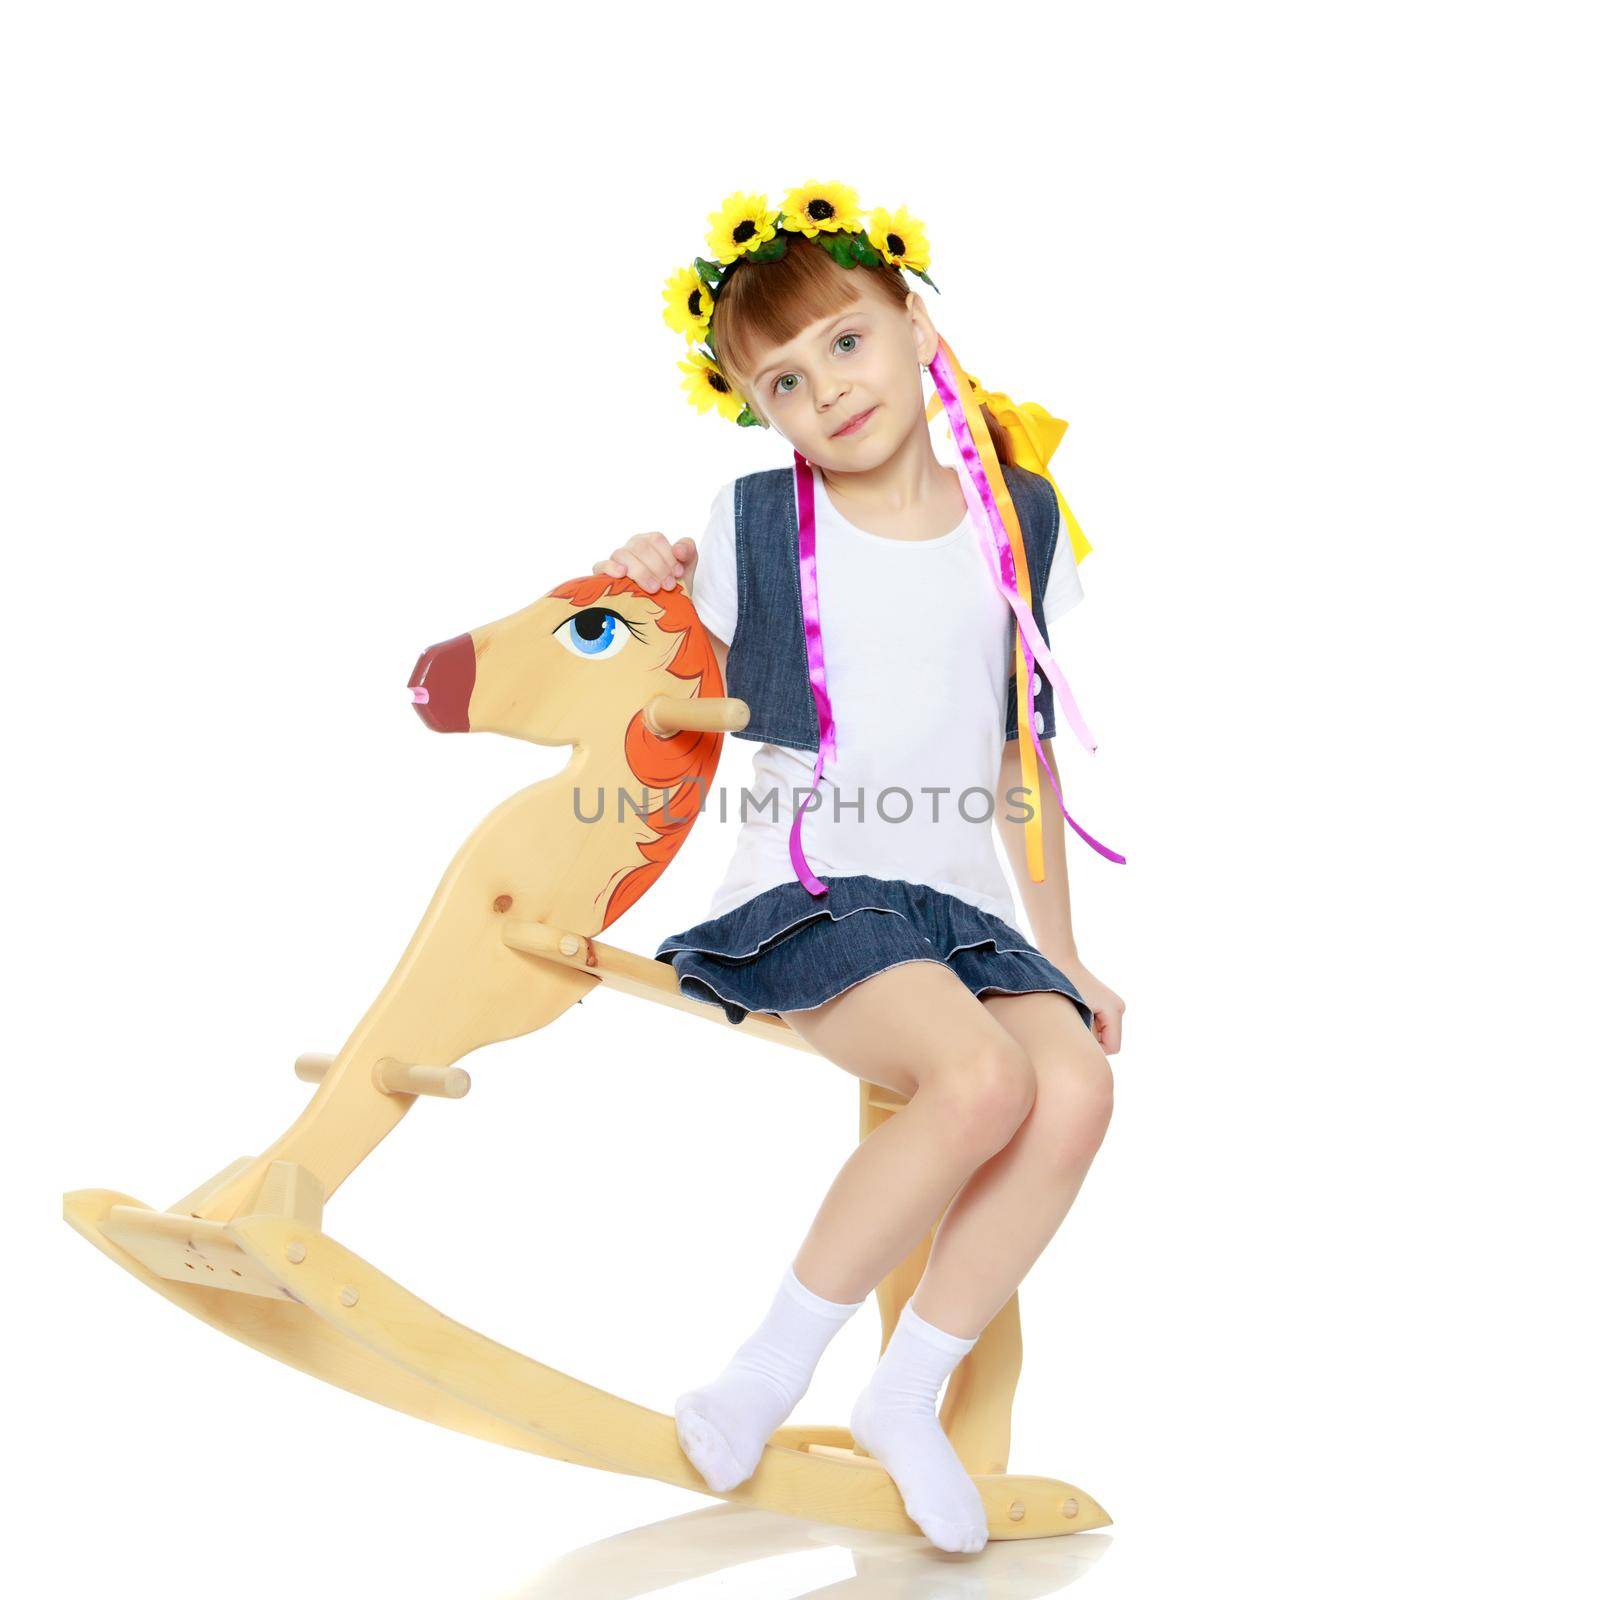 A beautiful little blonde girl in a summer short dress, and a wreath of yellow flowers on her head.The girl is rocking on a wooden horse.